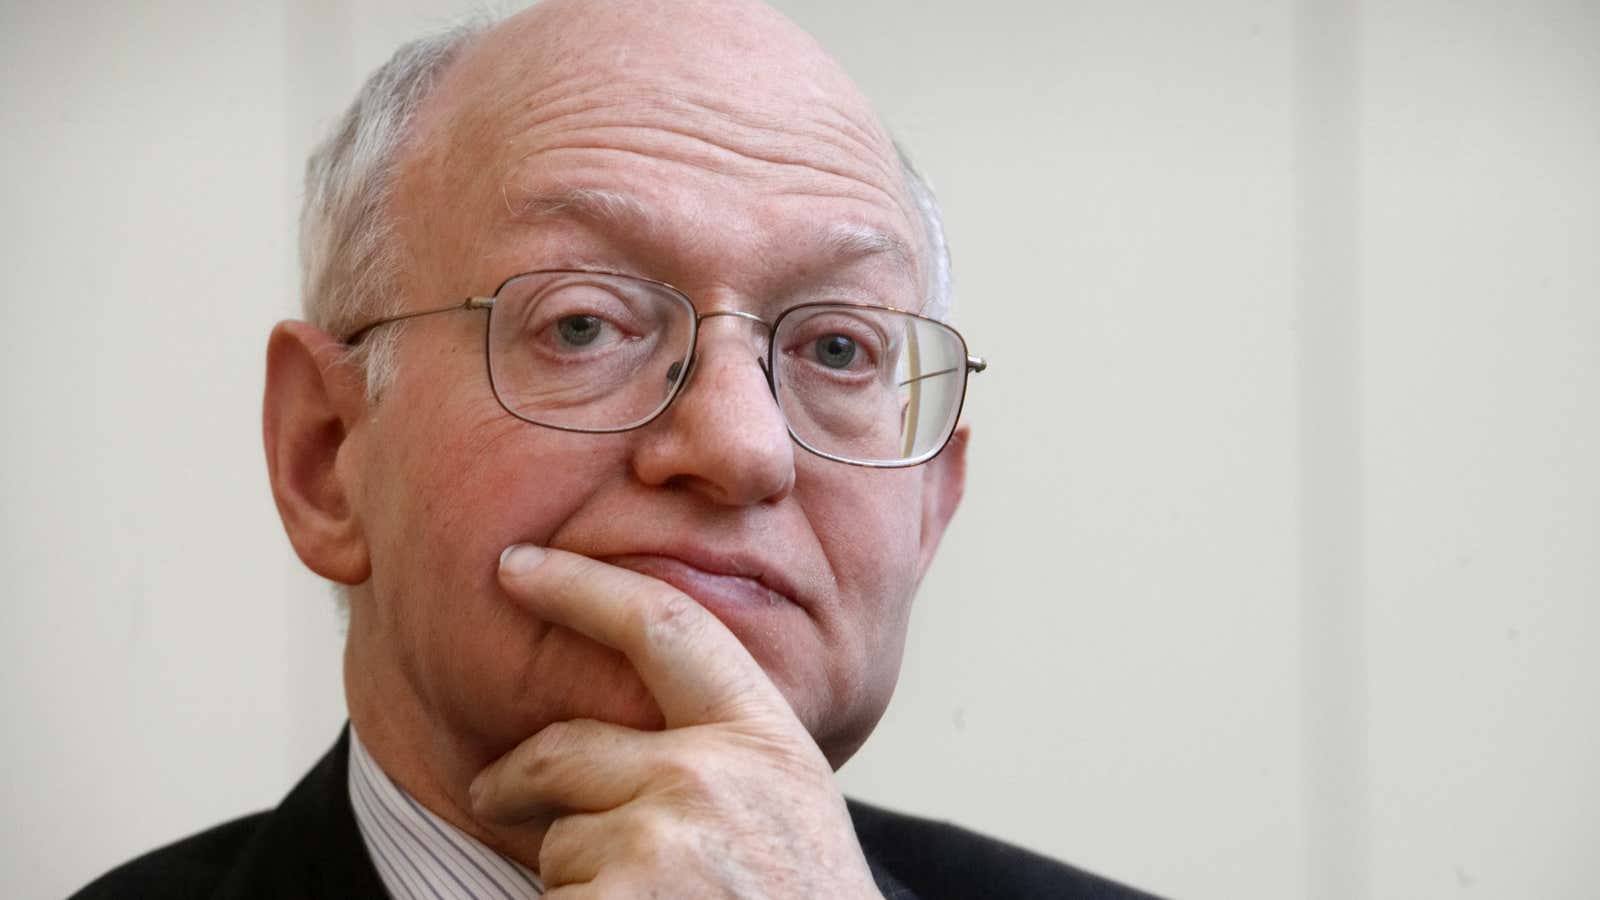 Martin Feldstein has been too quick to call the Fed’s quantitative easing strategy a failure.